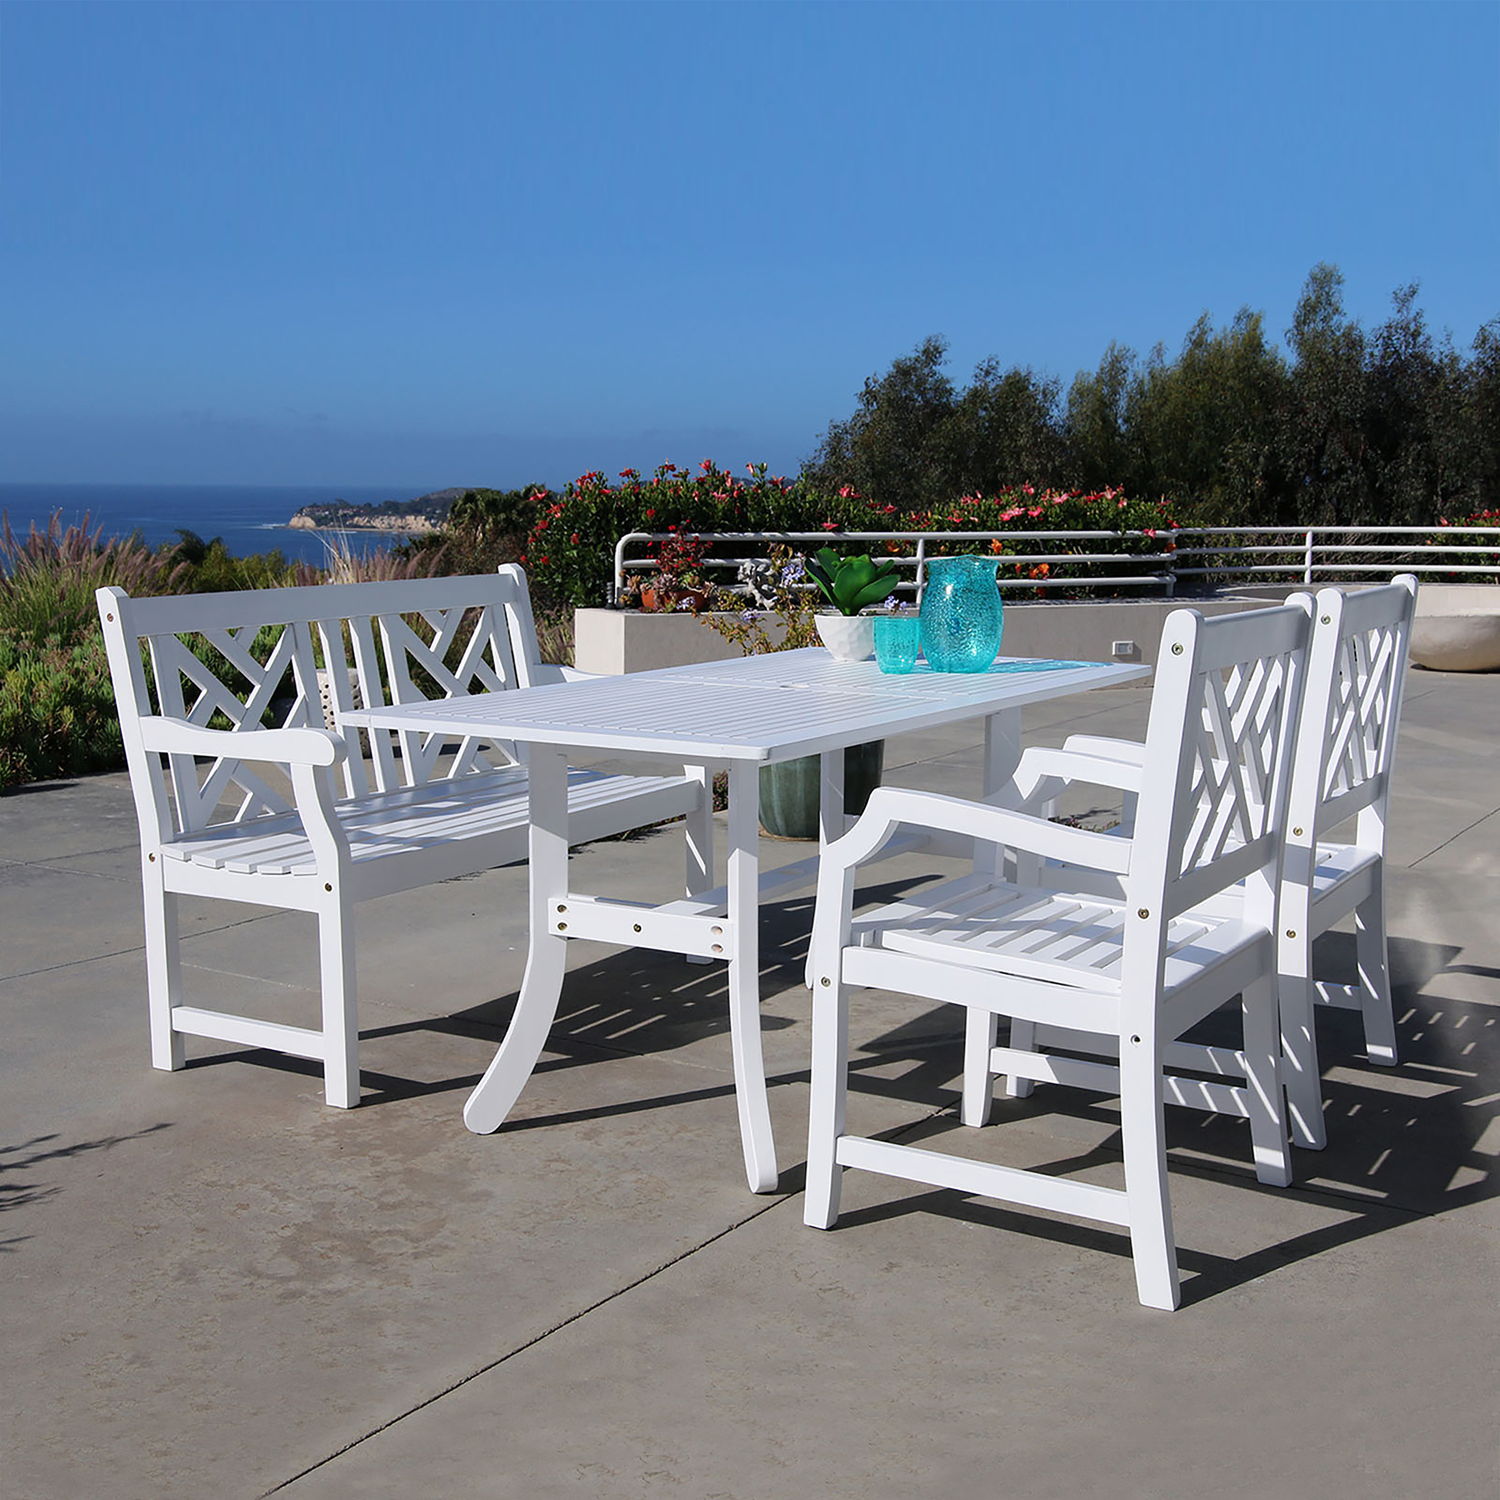 Bradley Outdoor 4-piece Wood Patio Dining Set with 4-foot Bench in White